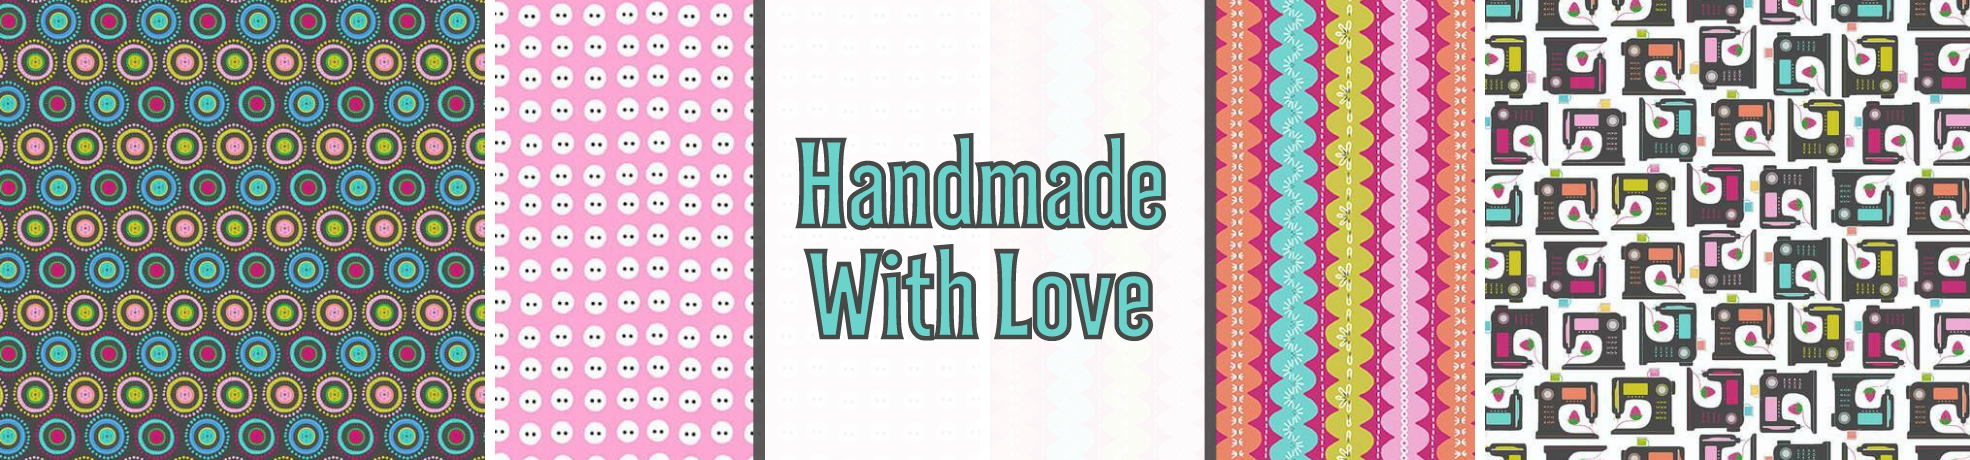 Handmade With Love Fabric Collection